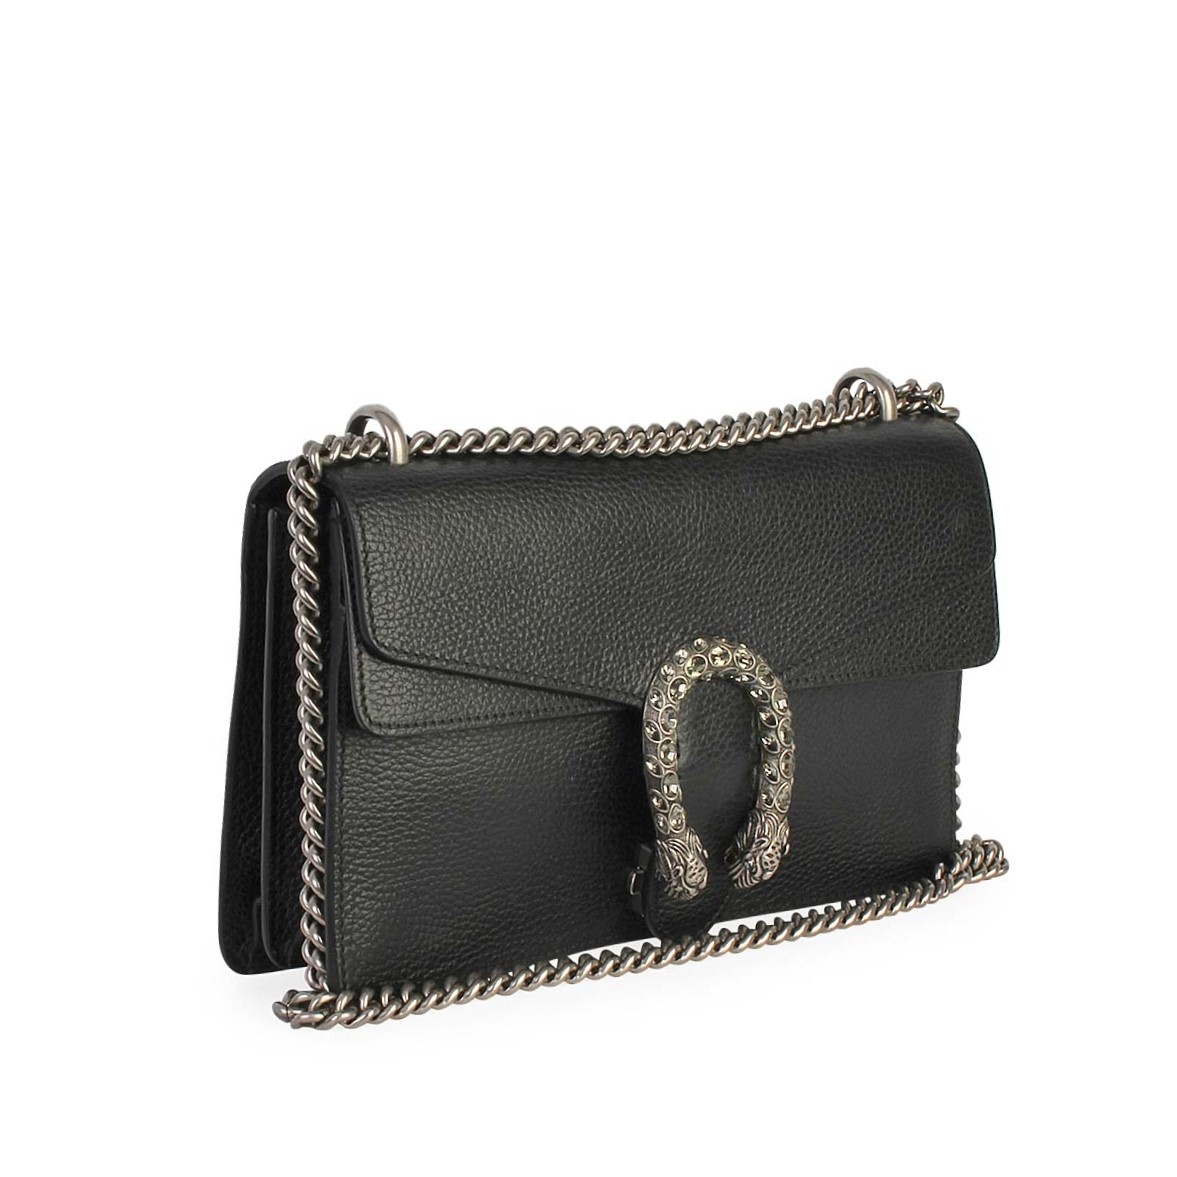 GUCCI Pebbled Leather Dionysus Small Shoulder Bag Black | Luxity